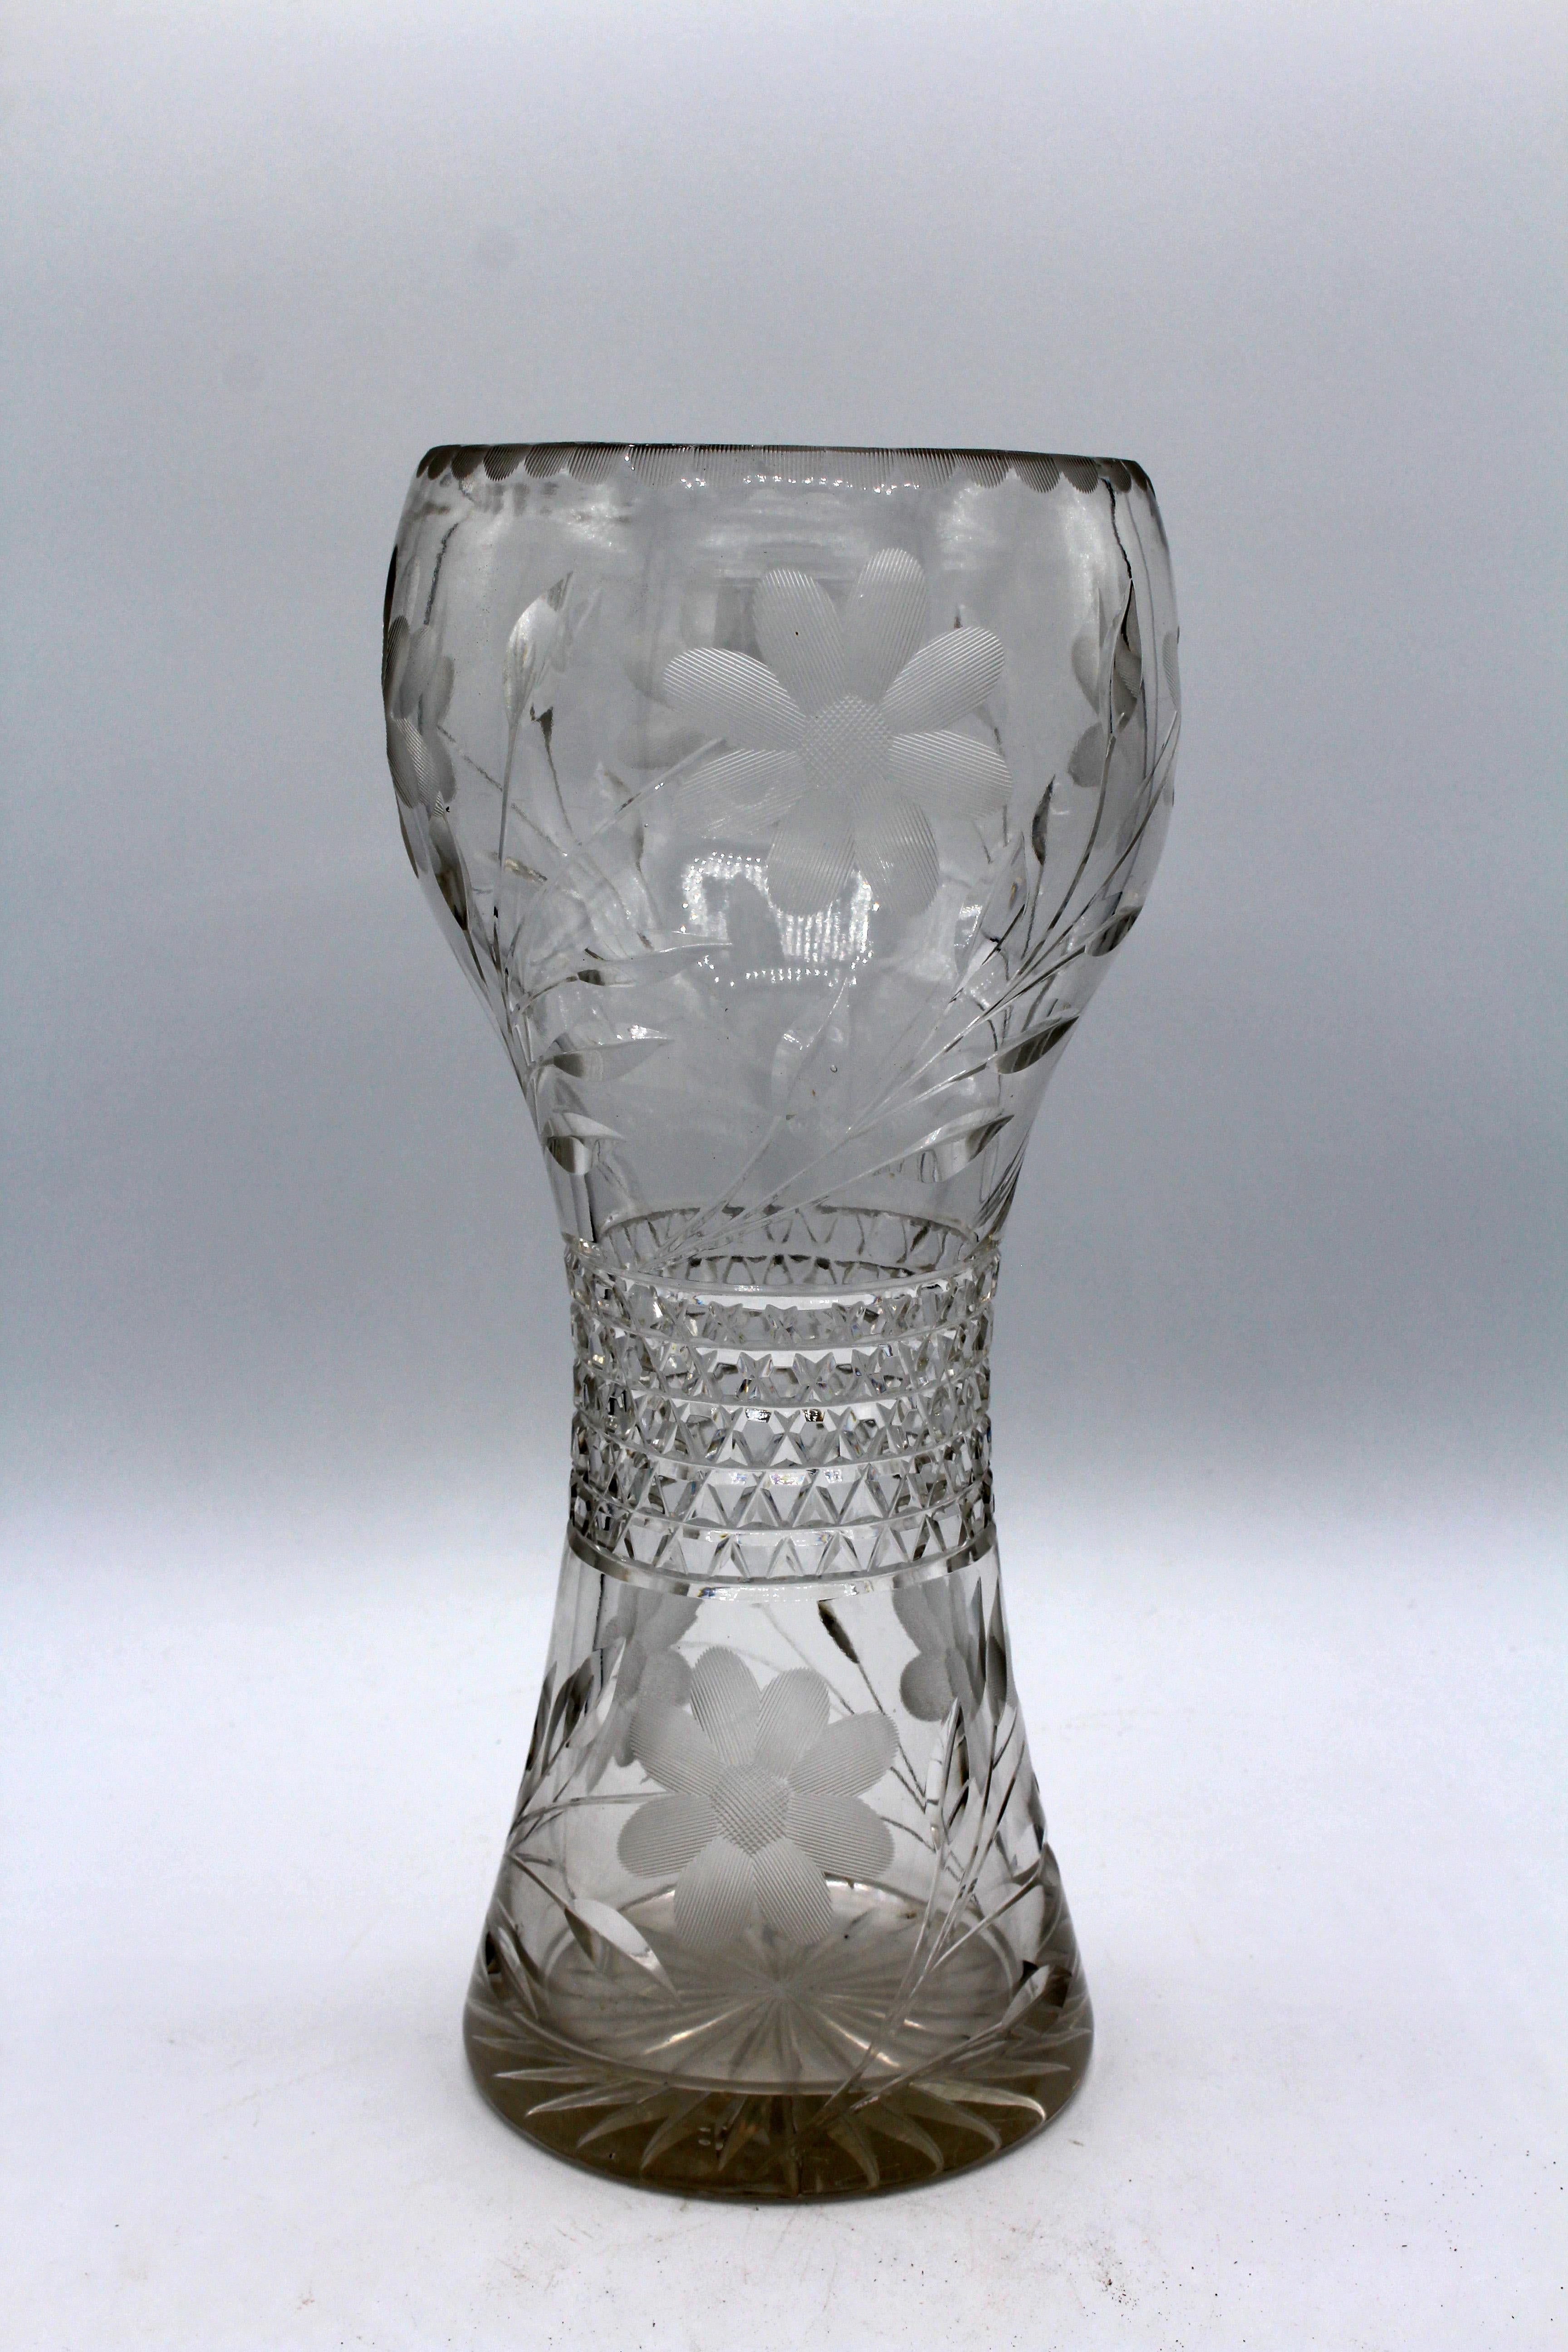 Circa 1910 American brilliant cut glass vase. Large roses with multi-faceted multi-band waist.
Measures: 11 3/4